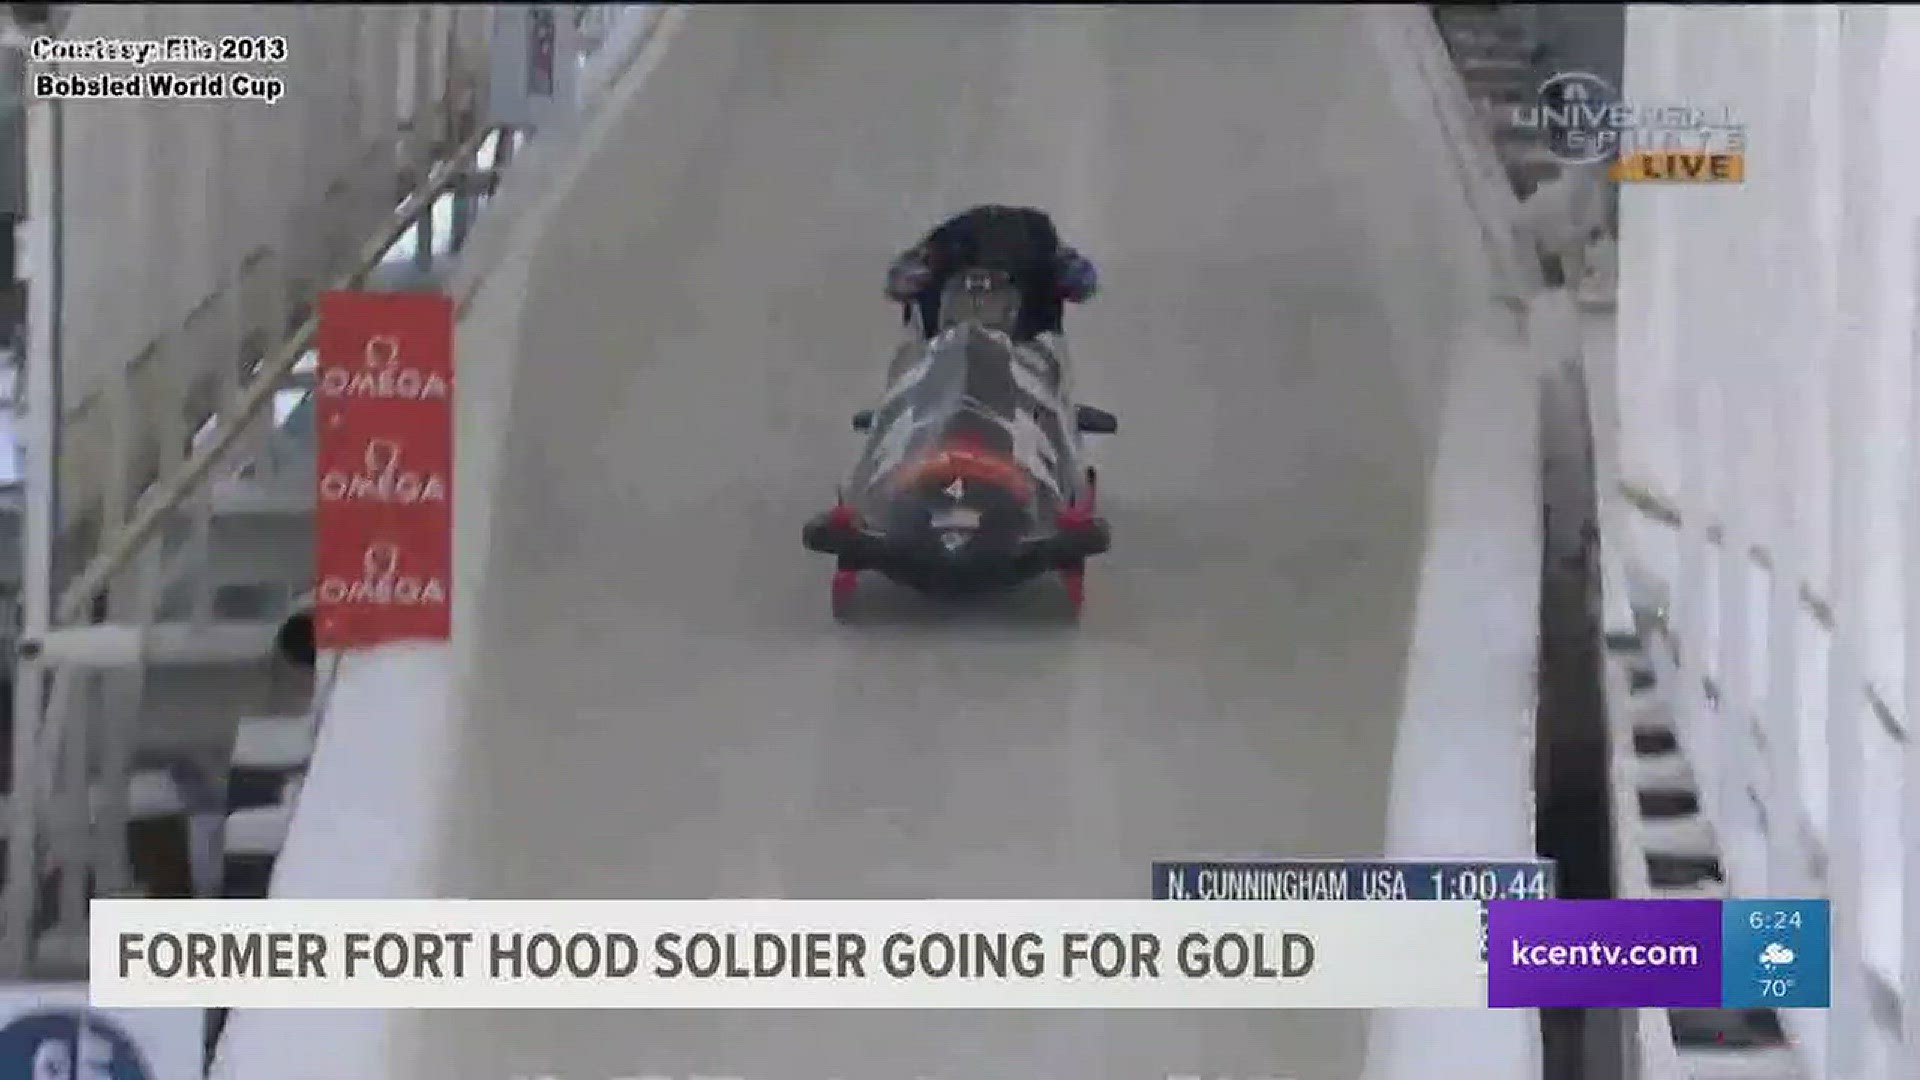 Former Fort Hood soldier going for gold this week kcentv